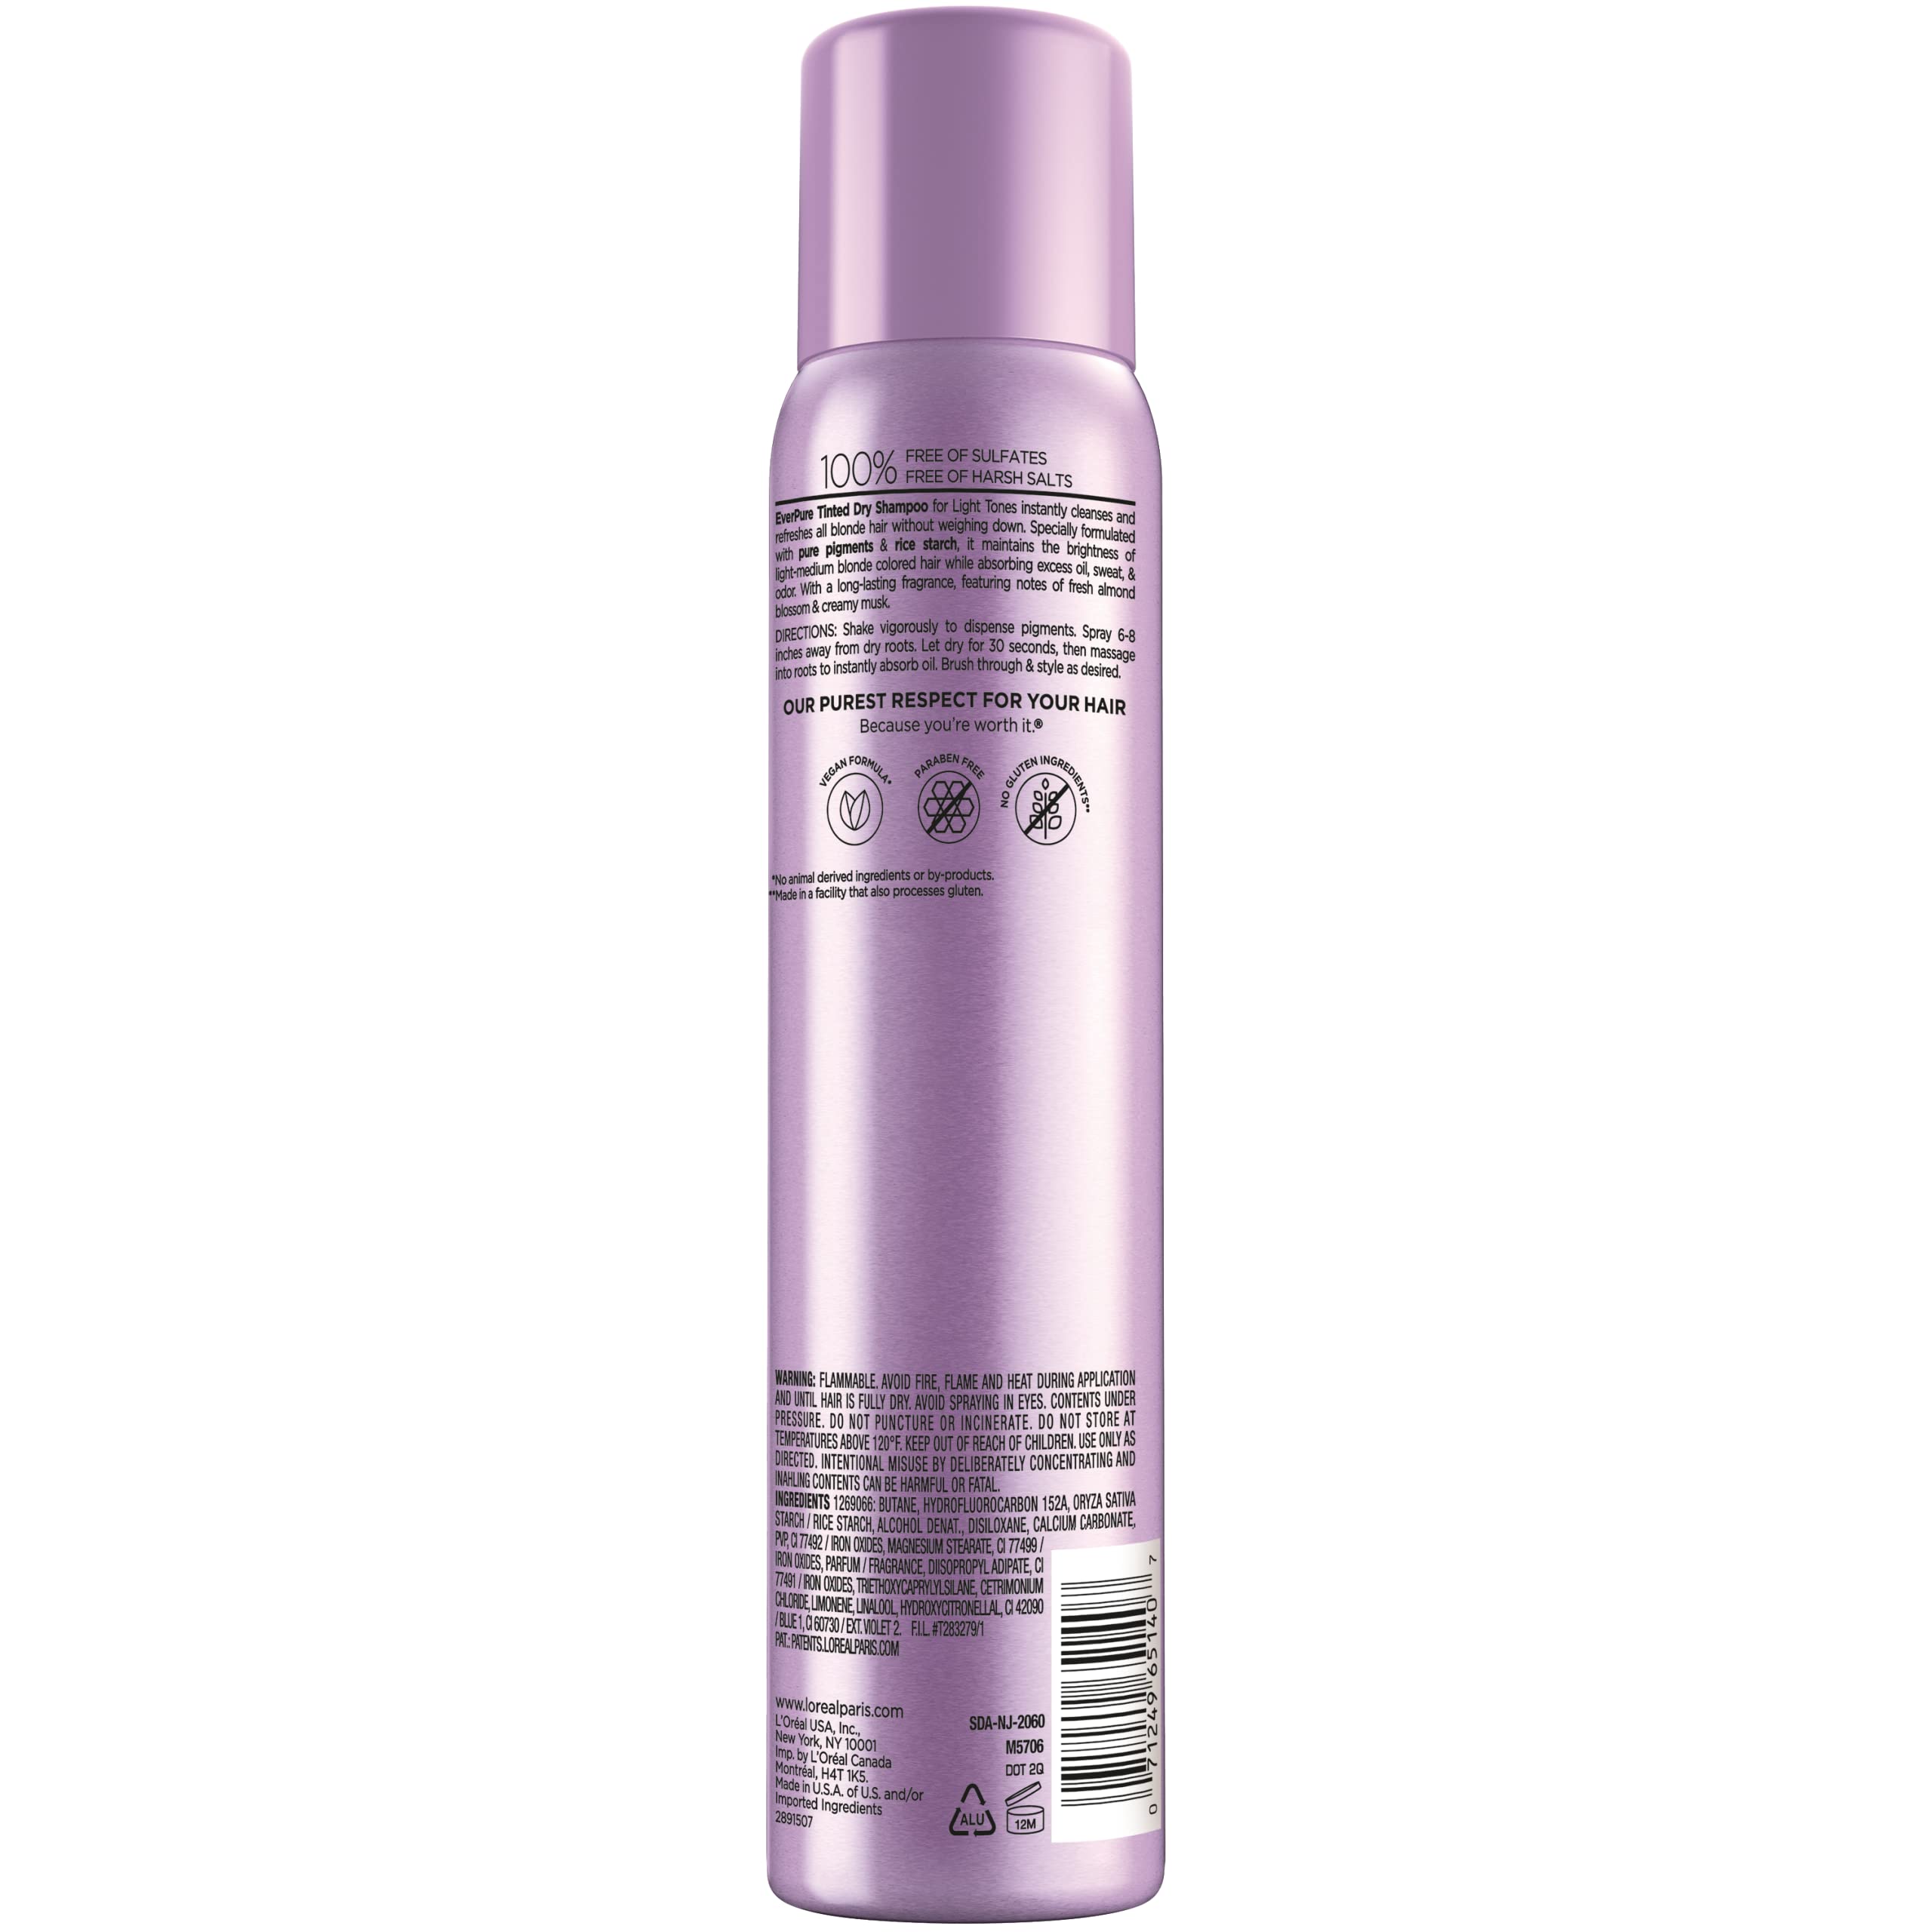 L'Oreal Paris EverPure Sulfate Free Tinted Dry Shampoo for Light Hair, for Blonde Hair, Absorbs Oil, Refreshes Colored Hair, with Rice Starch, Vegan Formula, Paraben Free, Gluten Free, 4 fl oz